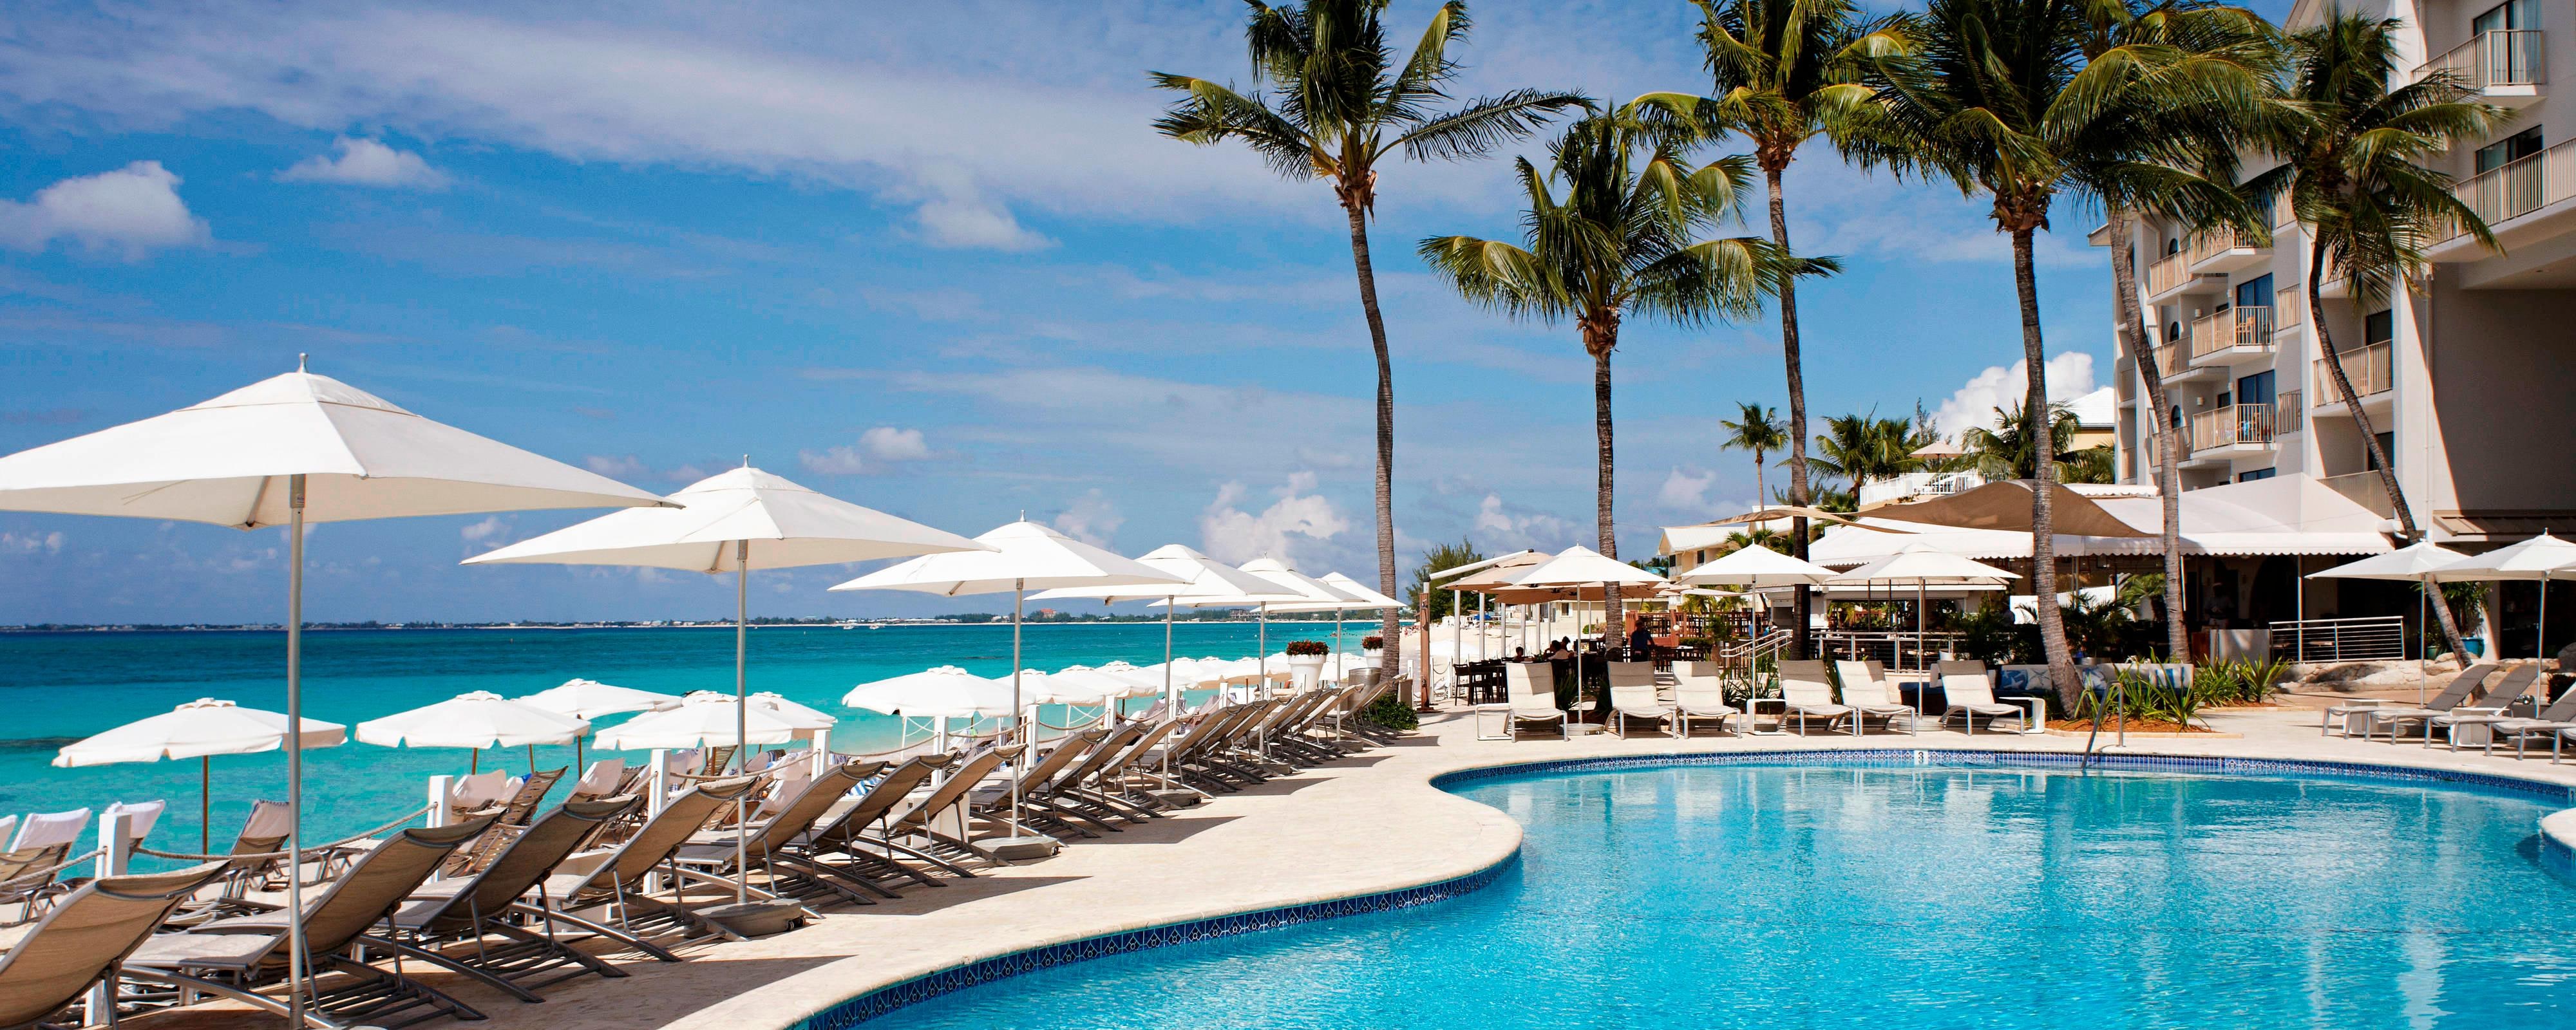 Grand Cayman Suites and Hotel Rooms | Grand Cayman Marriott Beach Resort